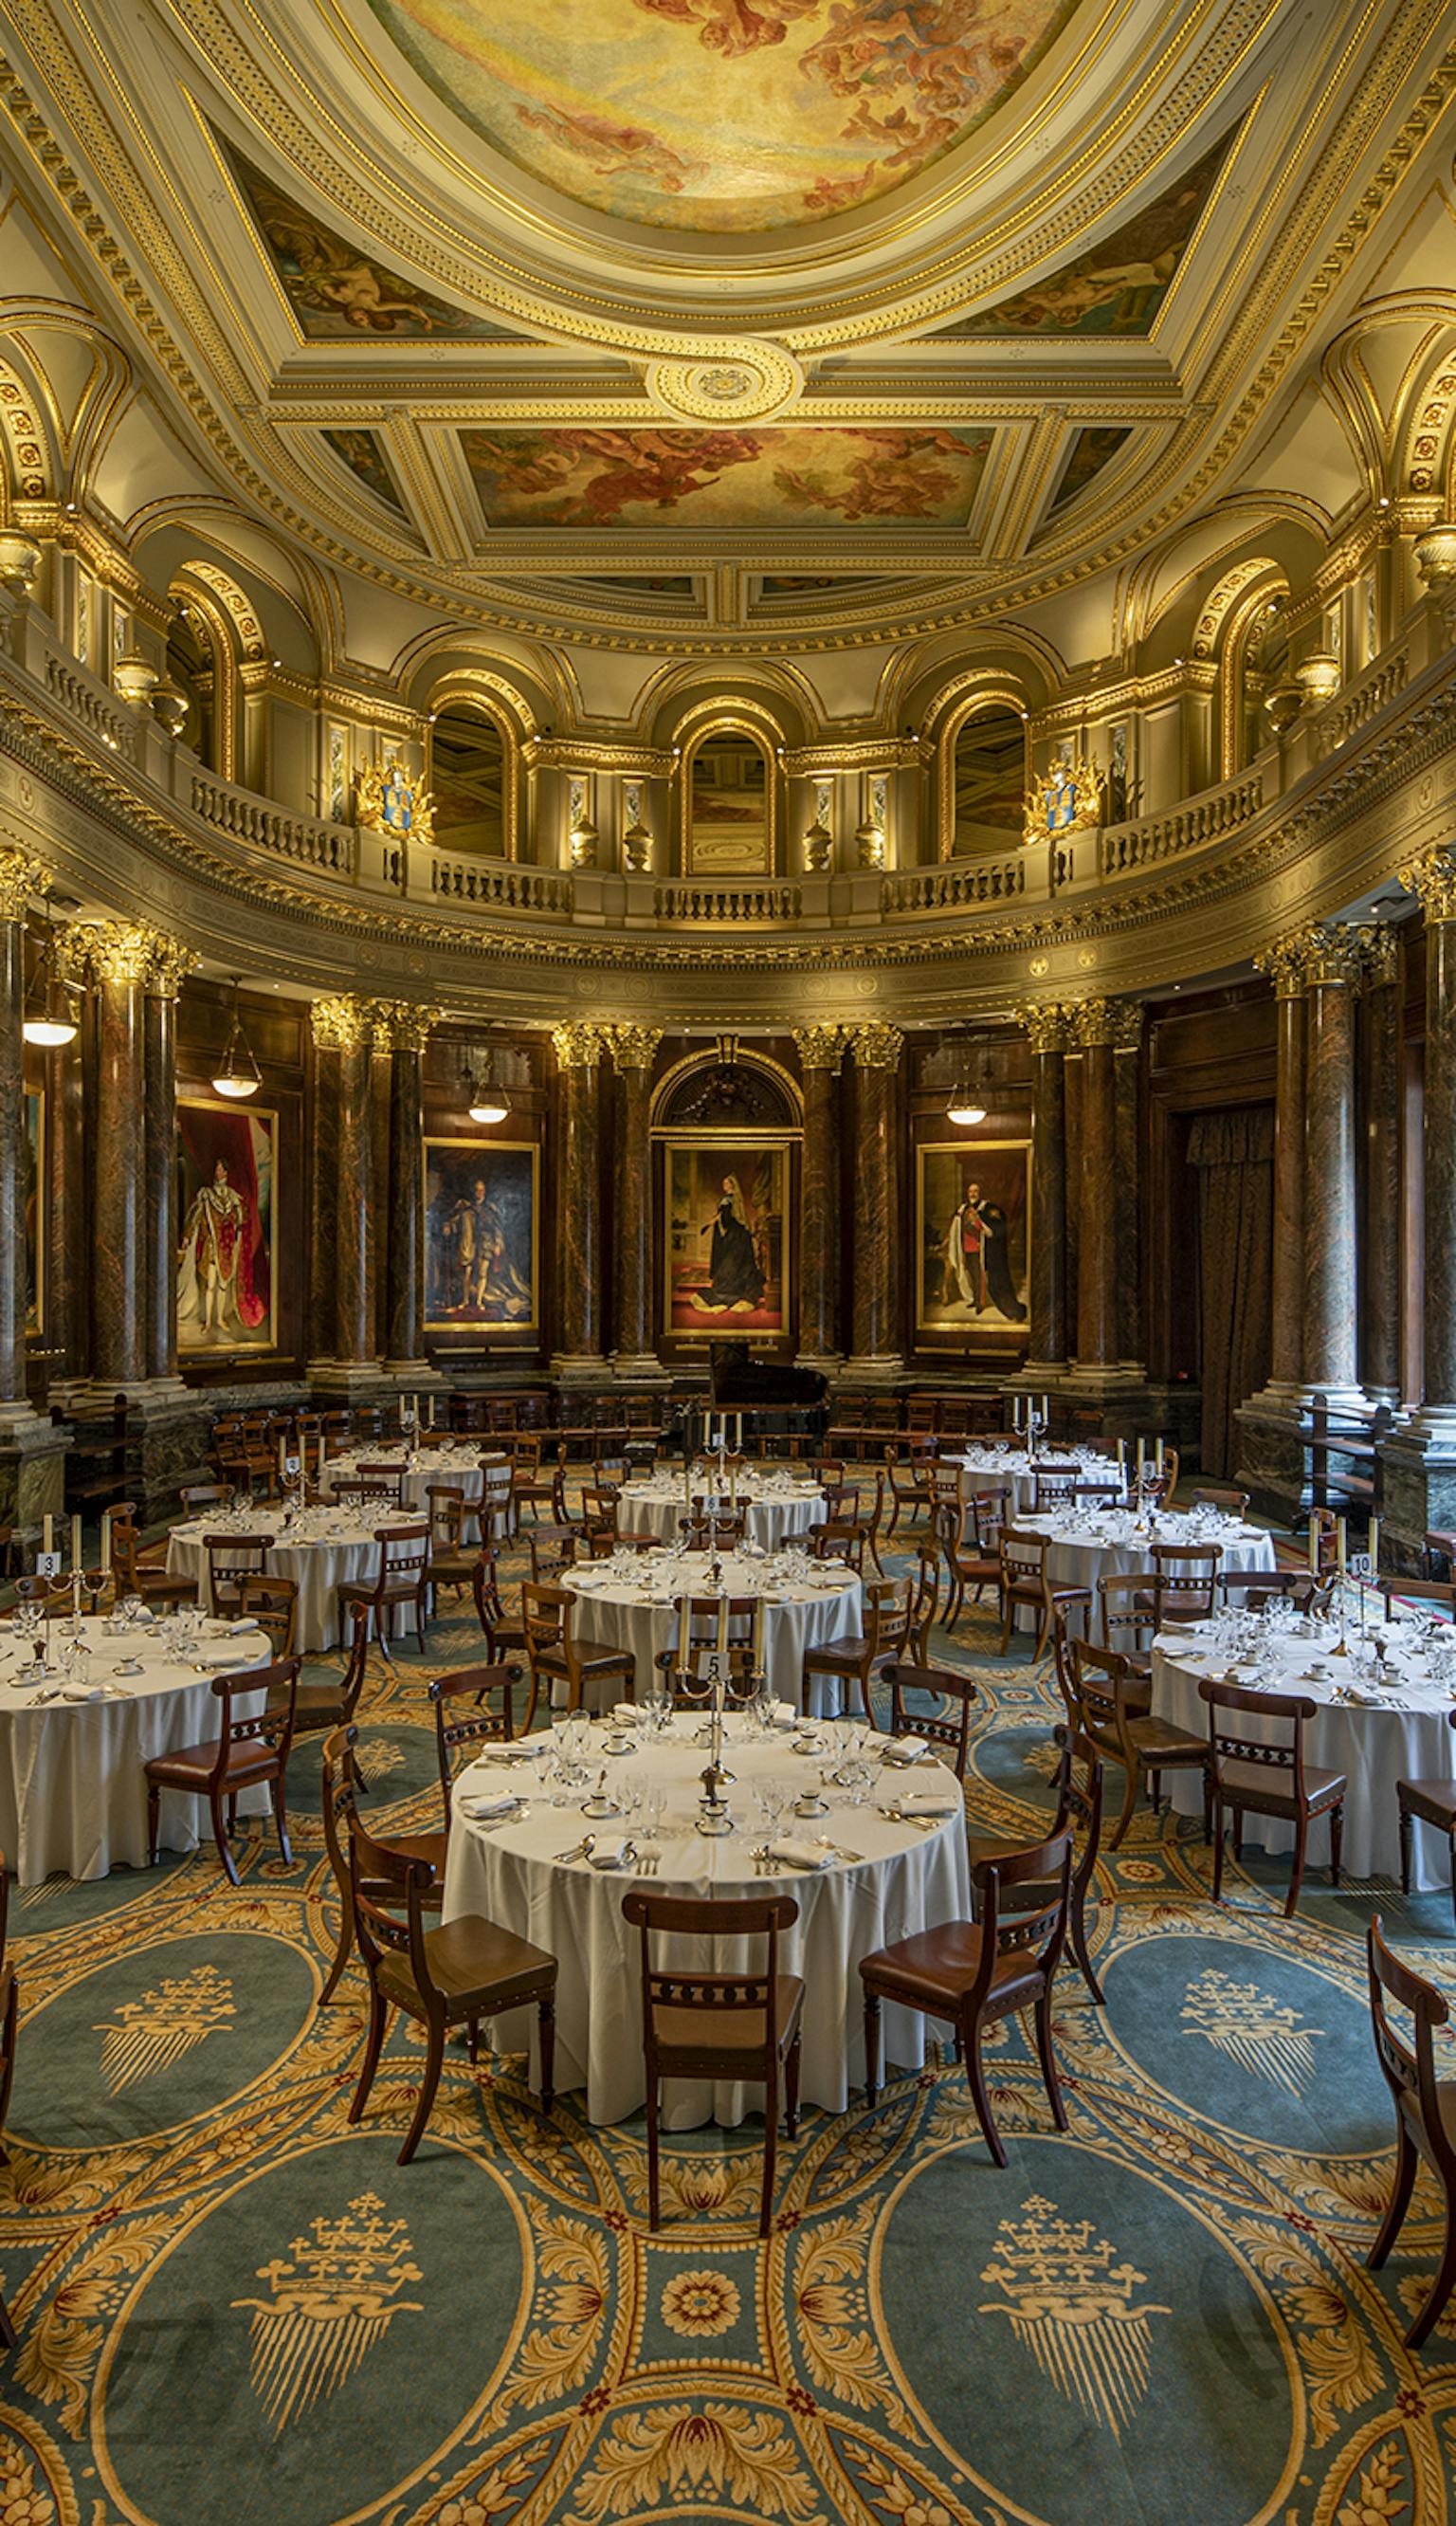 The dining set up at the recently restored Drapers' Hall